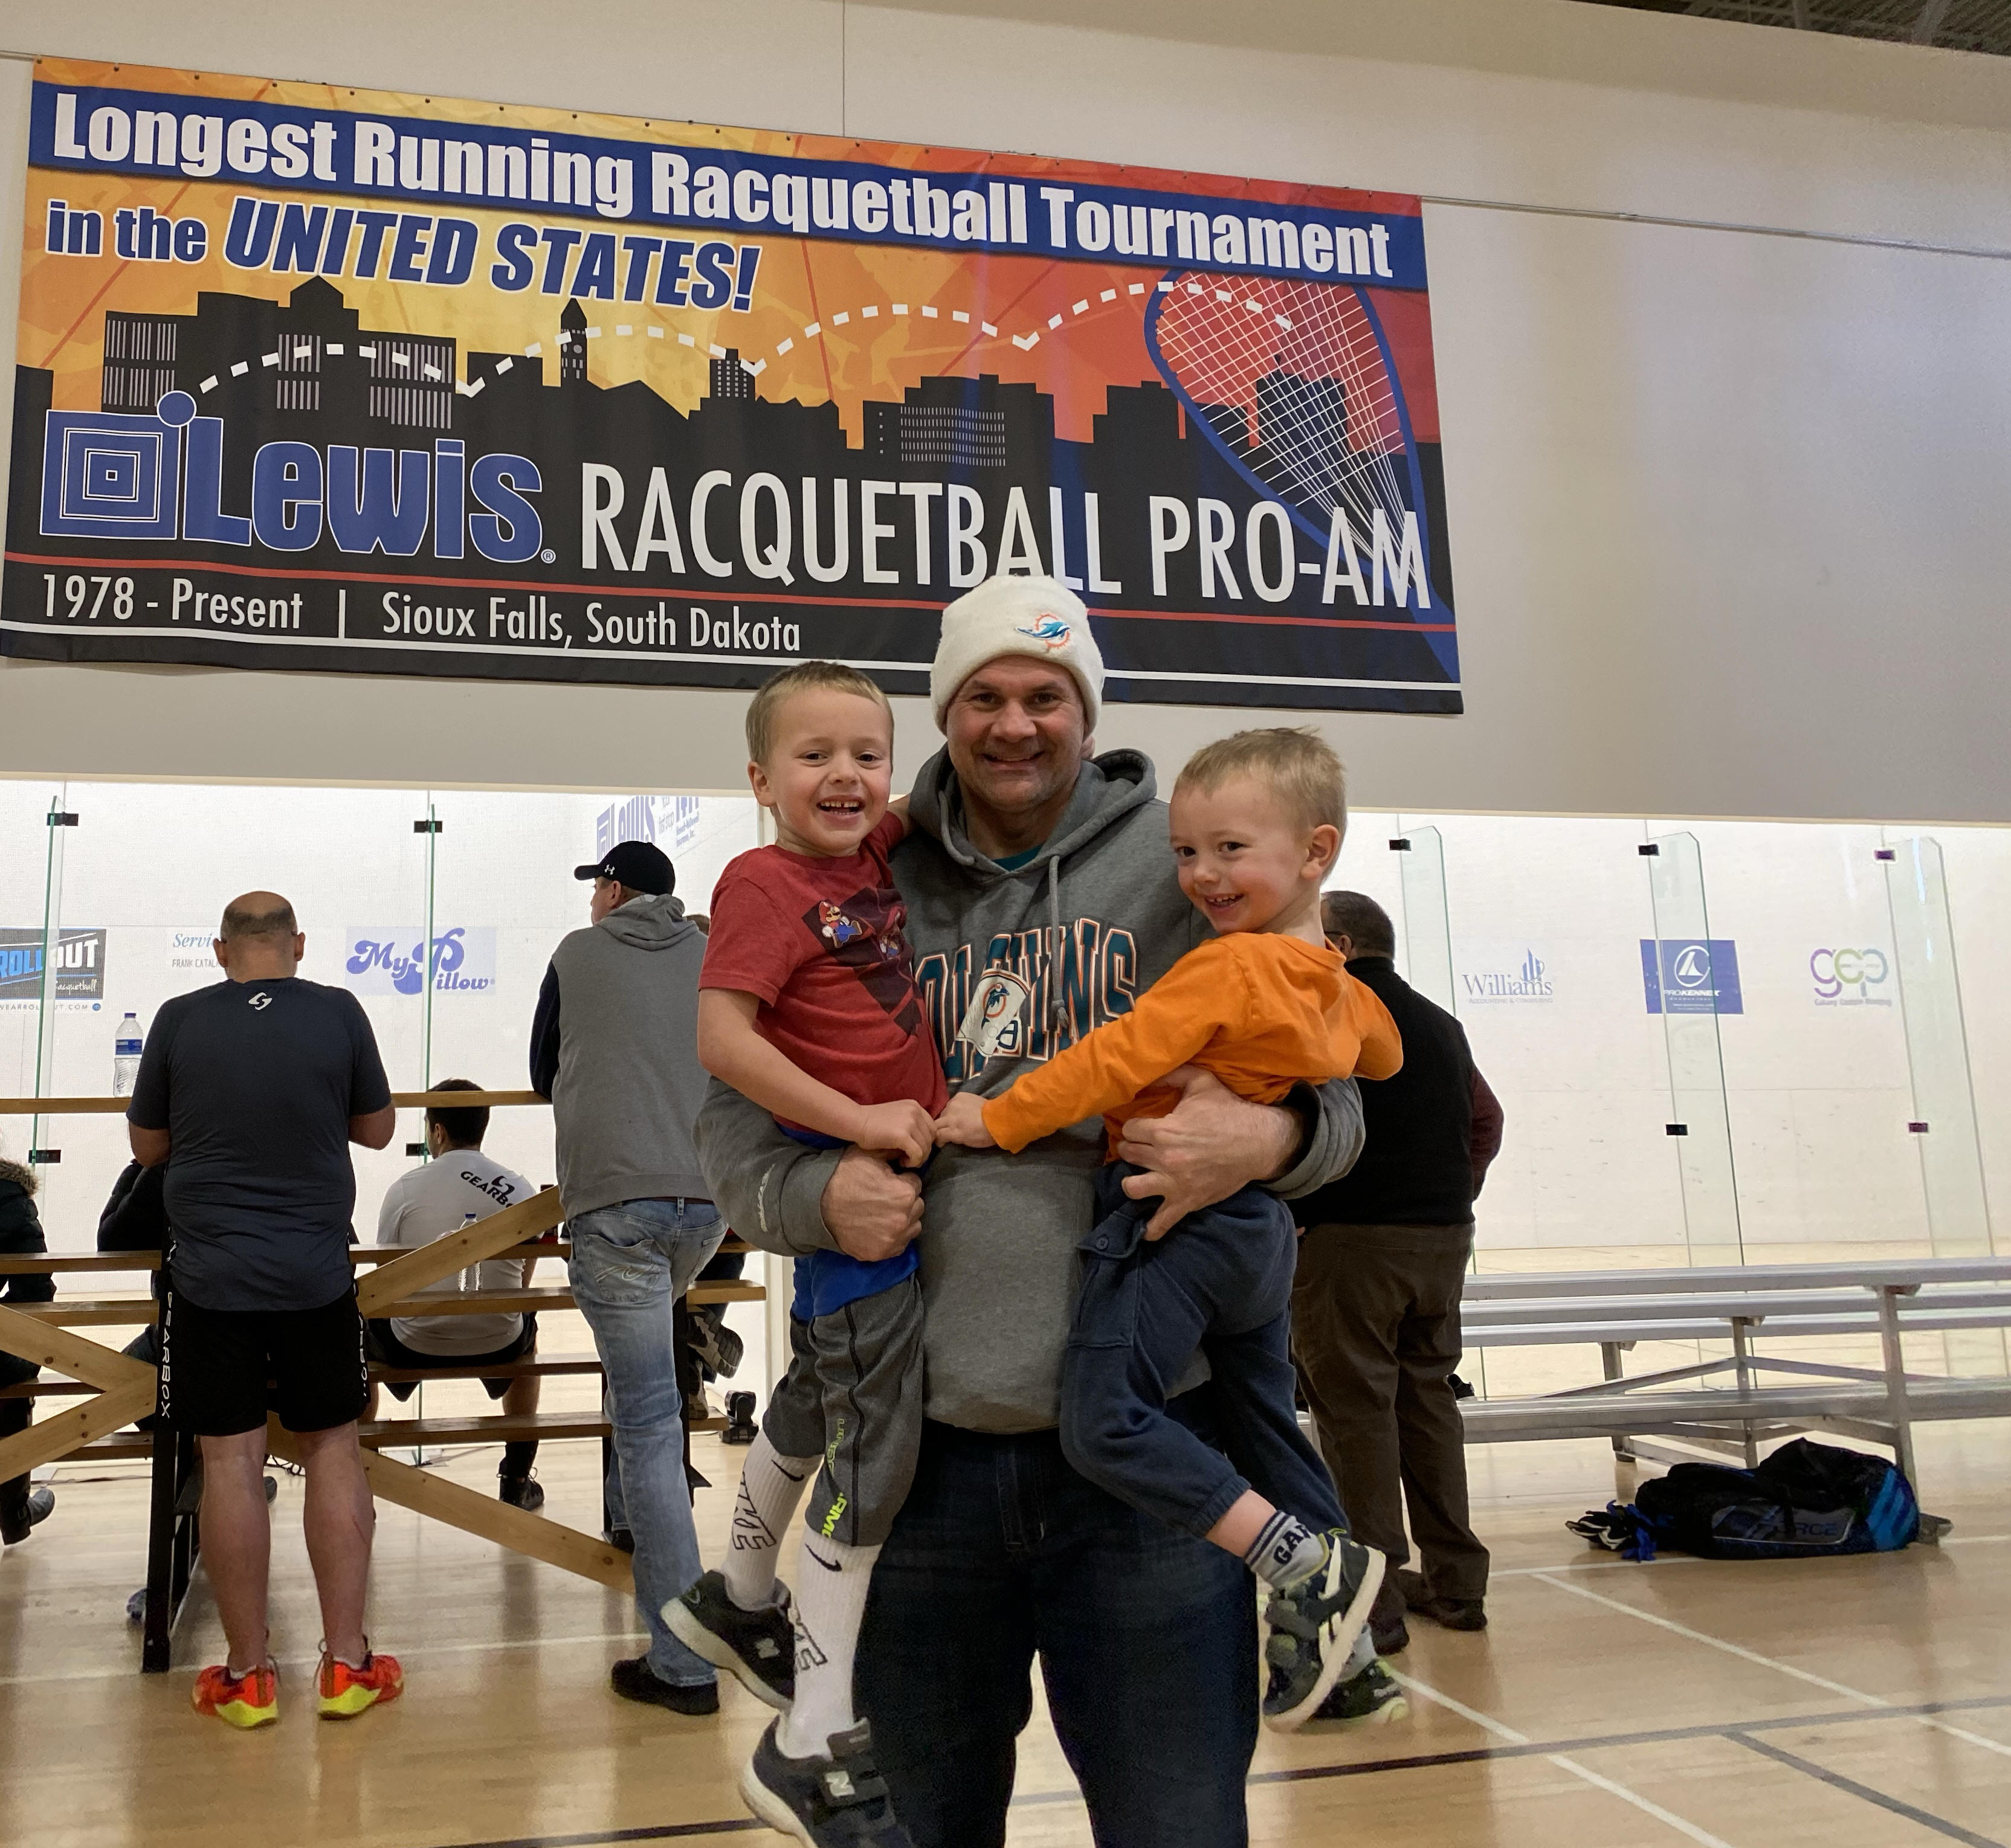 1-26-20 Lewis Drug Racquetball Tournament-nephews, racquetball, and Dolphins apparel--can it get any better?